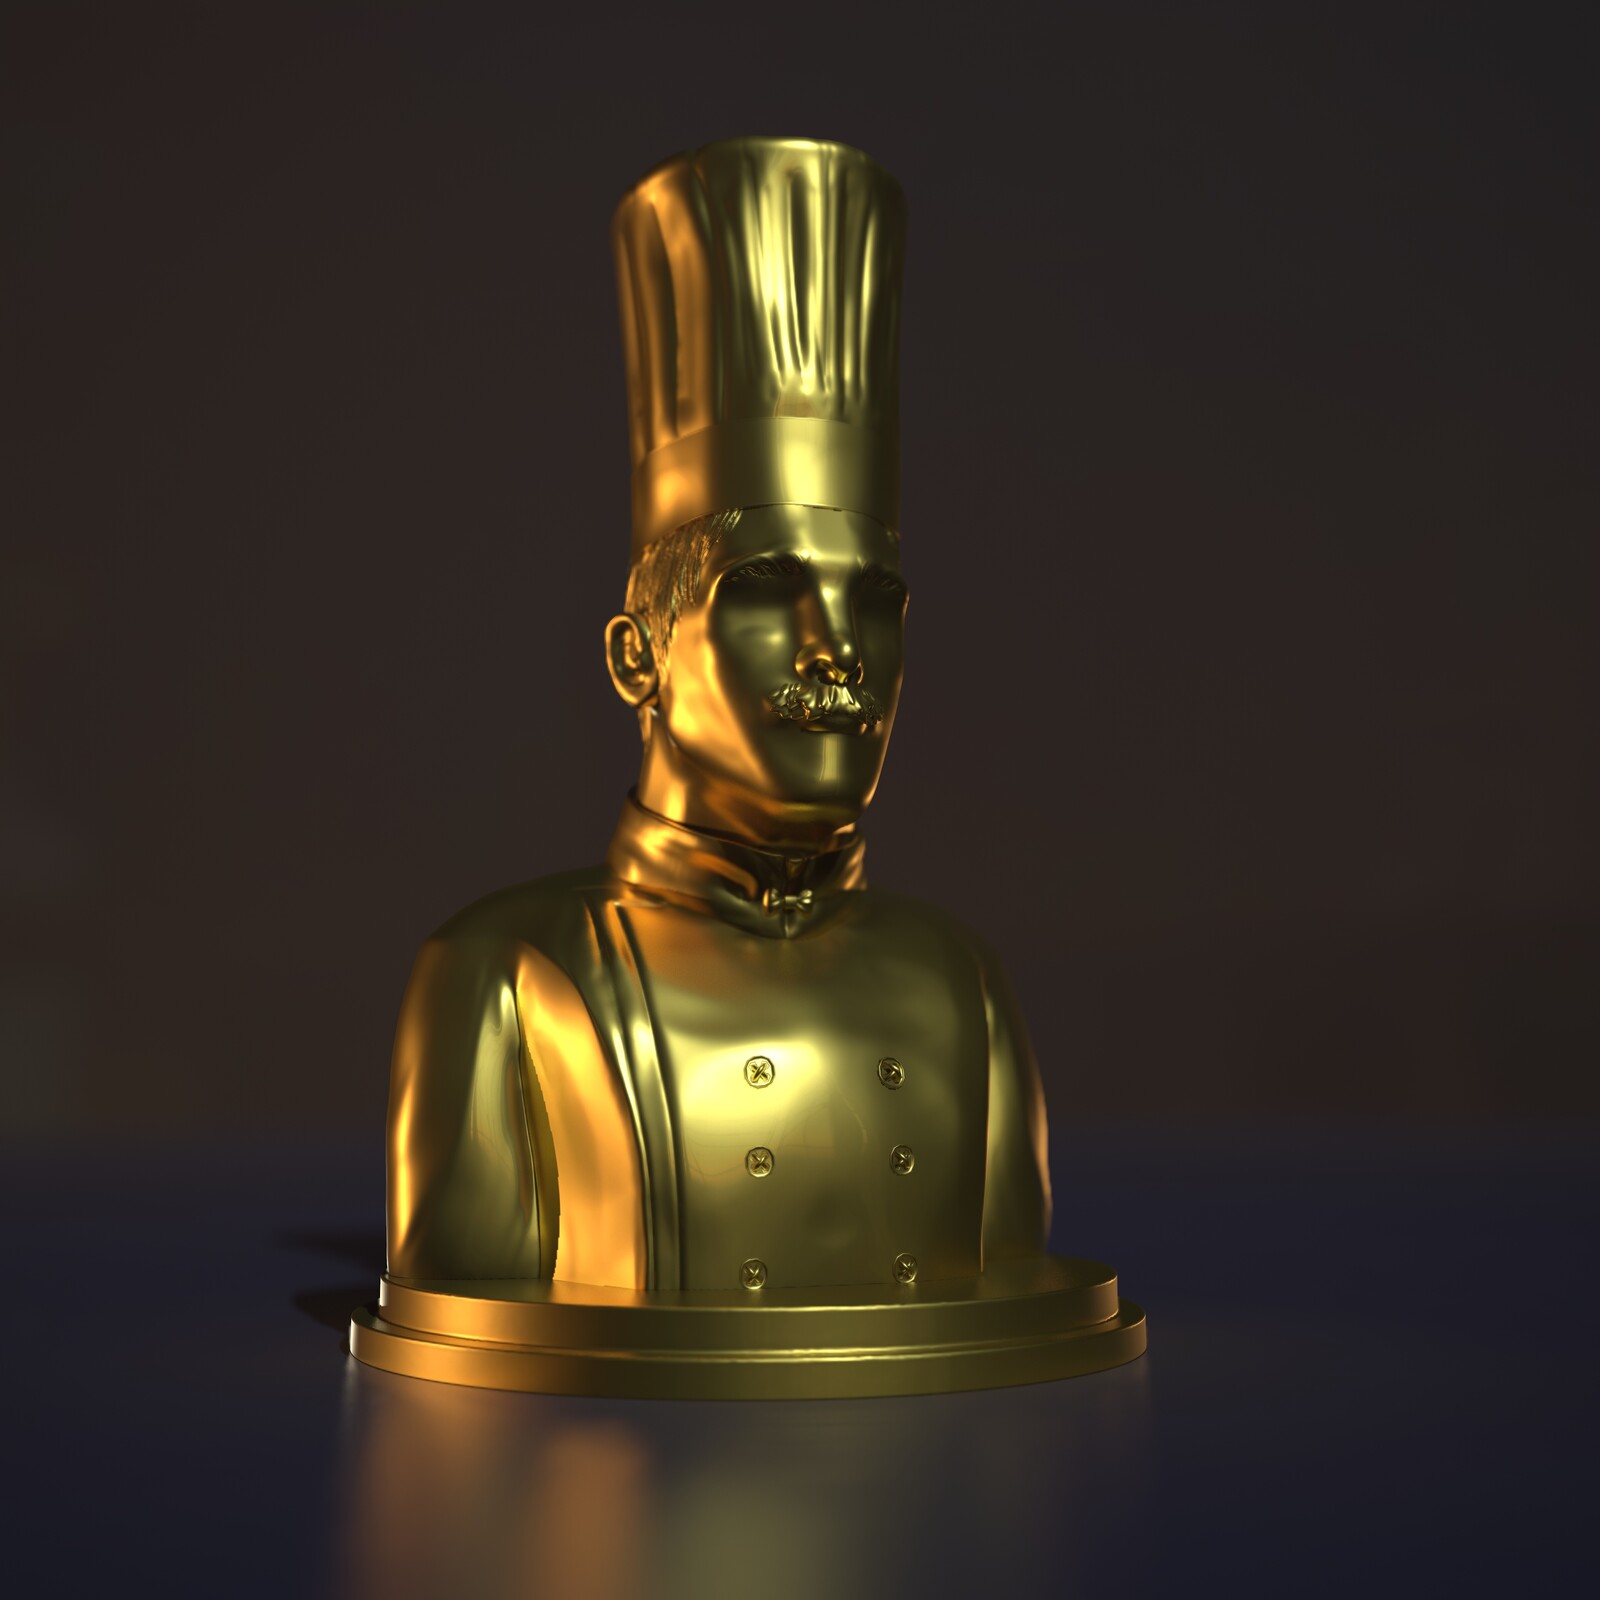 "The Golden Chef"